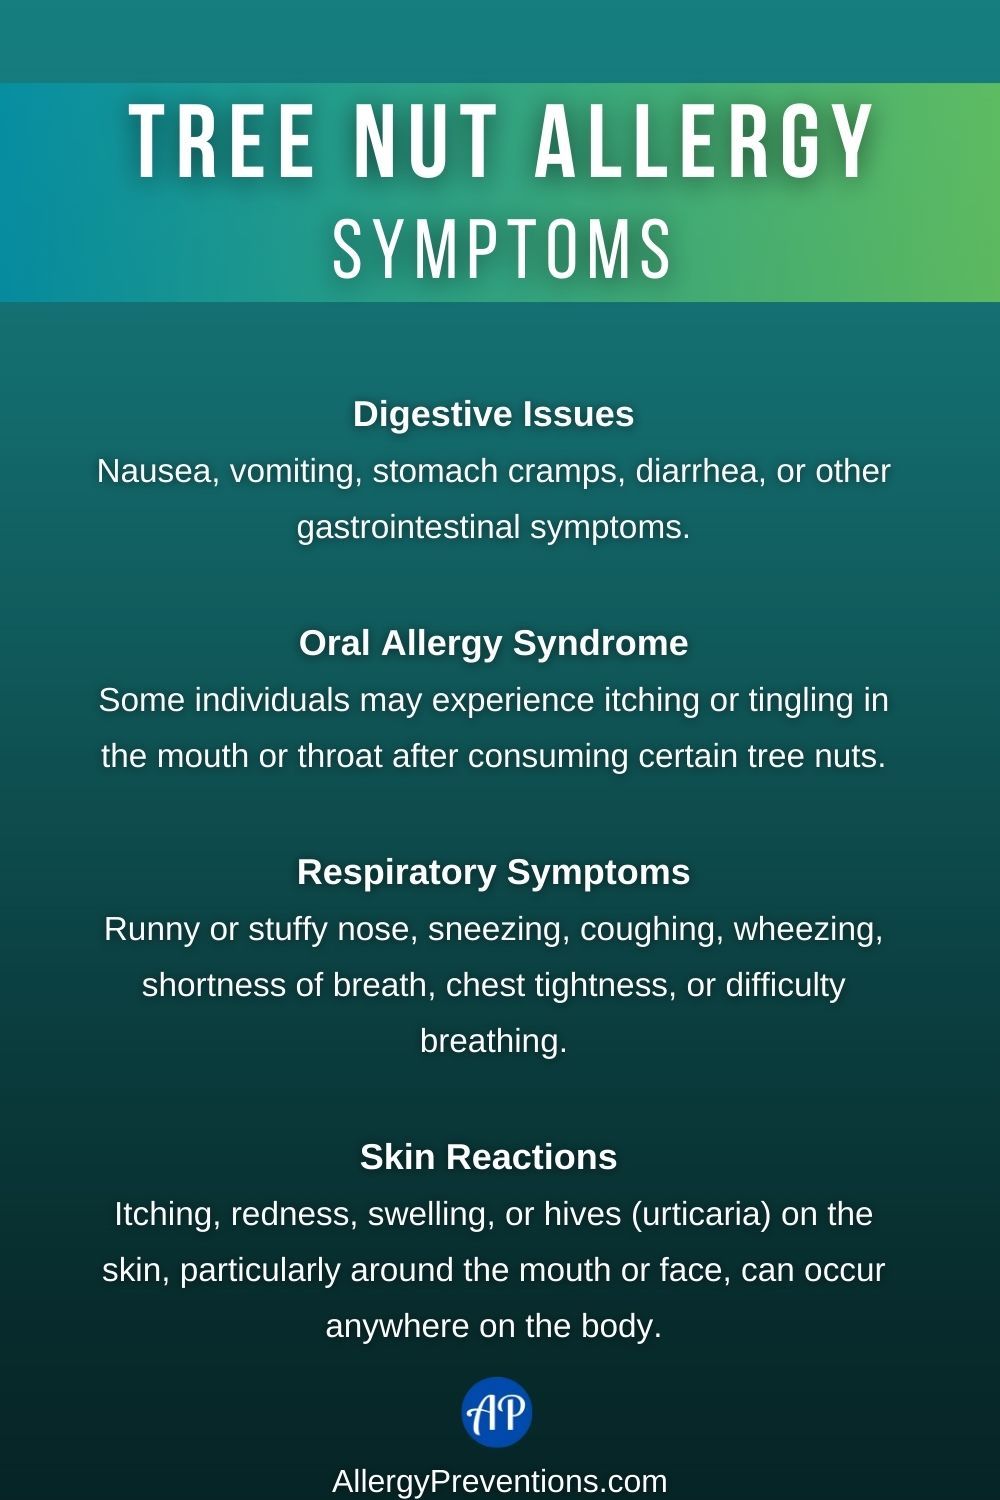 Tree Nut Allergy Symptoms Infographic: Digestive Issues Nausea, vomiting, stomach cramps, diarrhea, or other gastrointestinal symptoms. Oral Allergy Syndrome Some individuals may experience itching or tingling in the mouth or throat after consuming certain tree nuts. Respiratory Symptoms Runny or stuffy nose, sneezing, coughing, wheezing, shortness of breath, chest tightness, or difficulty breathing. Skin Reactions Itching, redness, swelling, or hives (urticaria) on the skin, particularly around the mouth or face, can occur anywhere on the body.